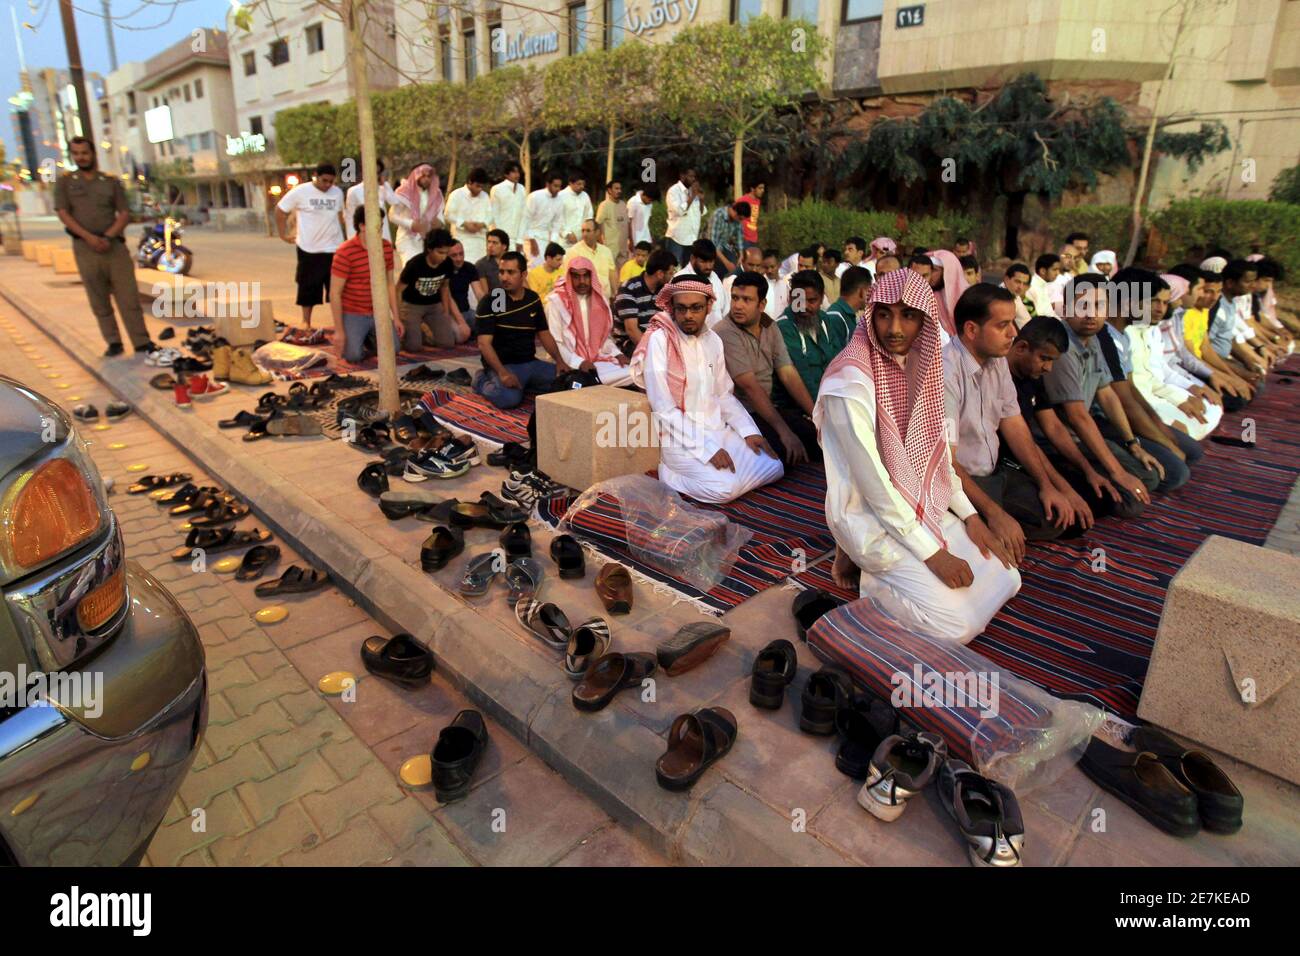 Members of the Committee for the Promotion of Virtue and Prevention of Vice, or religious police, perform dusk prayers with Saudi youth on the street outside coffee shops in Riyadh June 27, 2010. The men conducted the prayers during half-time of the World Cup soccer match between Germany and England, which they had been watching. The police have been ensuring that people watching World Cup soccer matches at the coffee shops continue to conduct their prayers during the duration of the soccer tournament. REUTERS/Fahad Shadeed (SAUDI ARABIA - Tags: SPORT SOCCER WORLD CUP RELIGION IMAGES OF THE DA Foto de stock